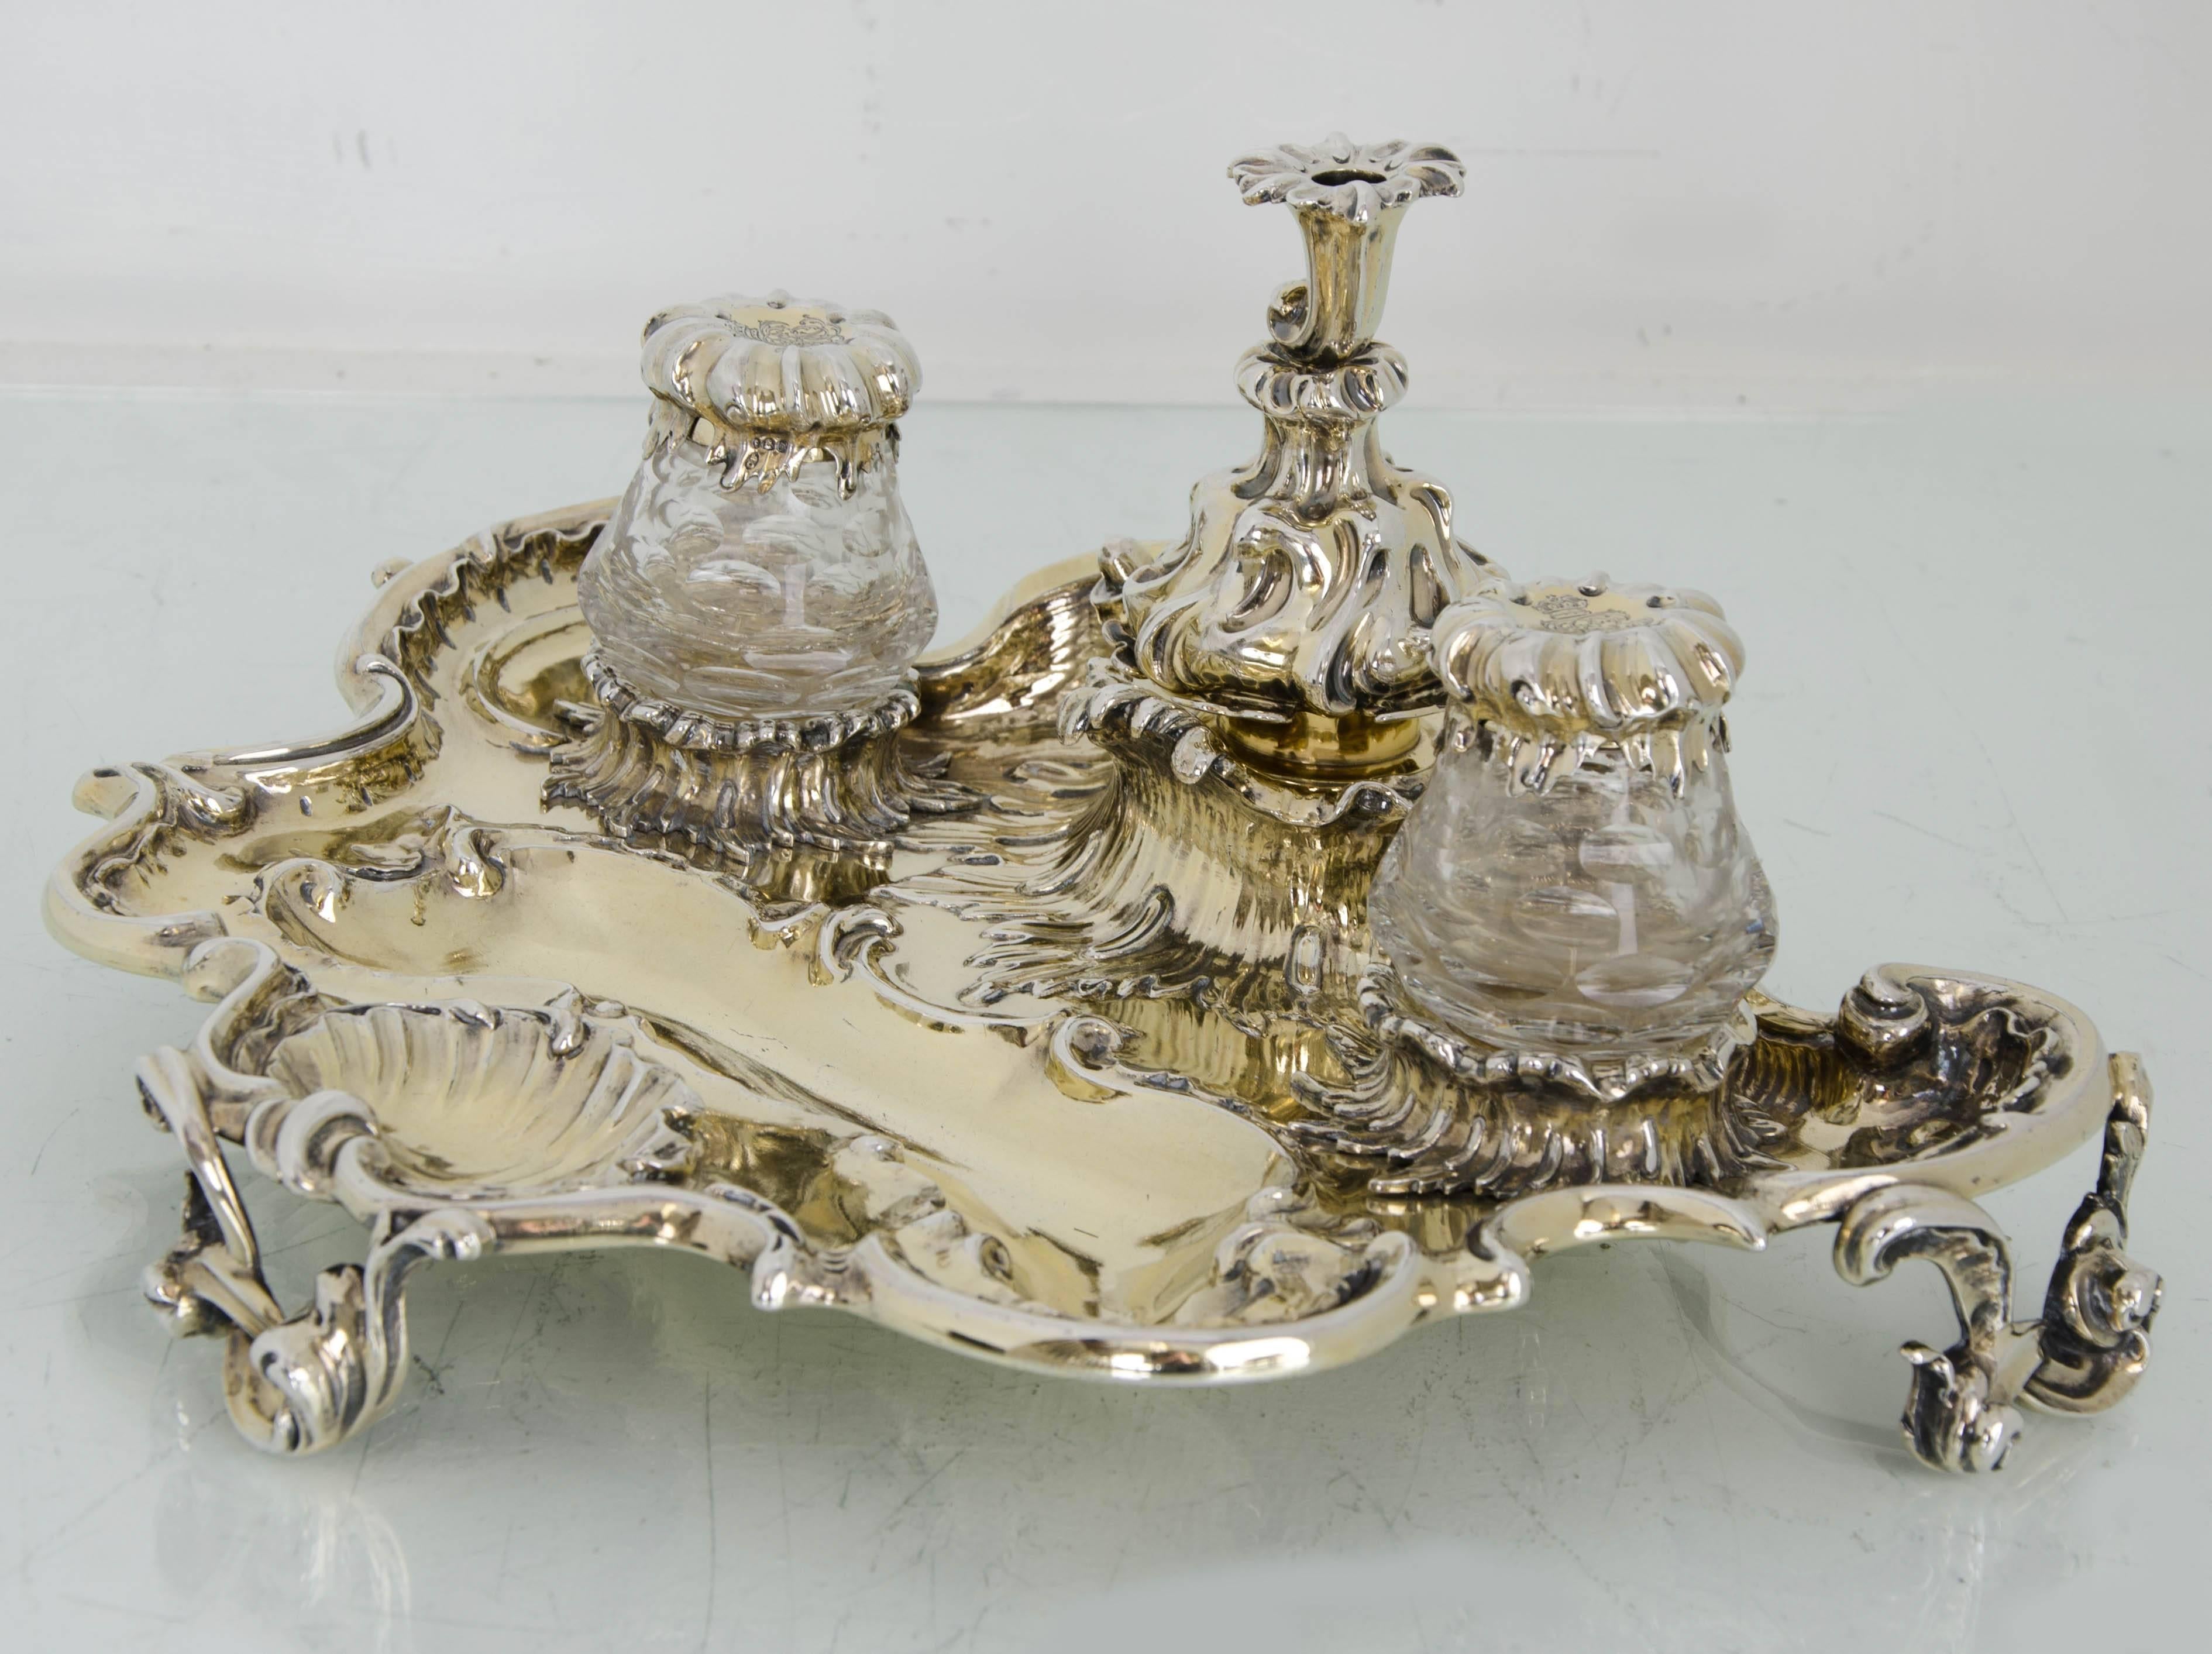 Hand-Crafted Victorian Silver Gilt 19th Century Desk Inkstand, London, 1839, Charles Fox For Sale